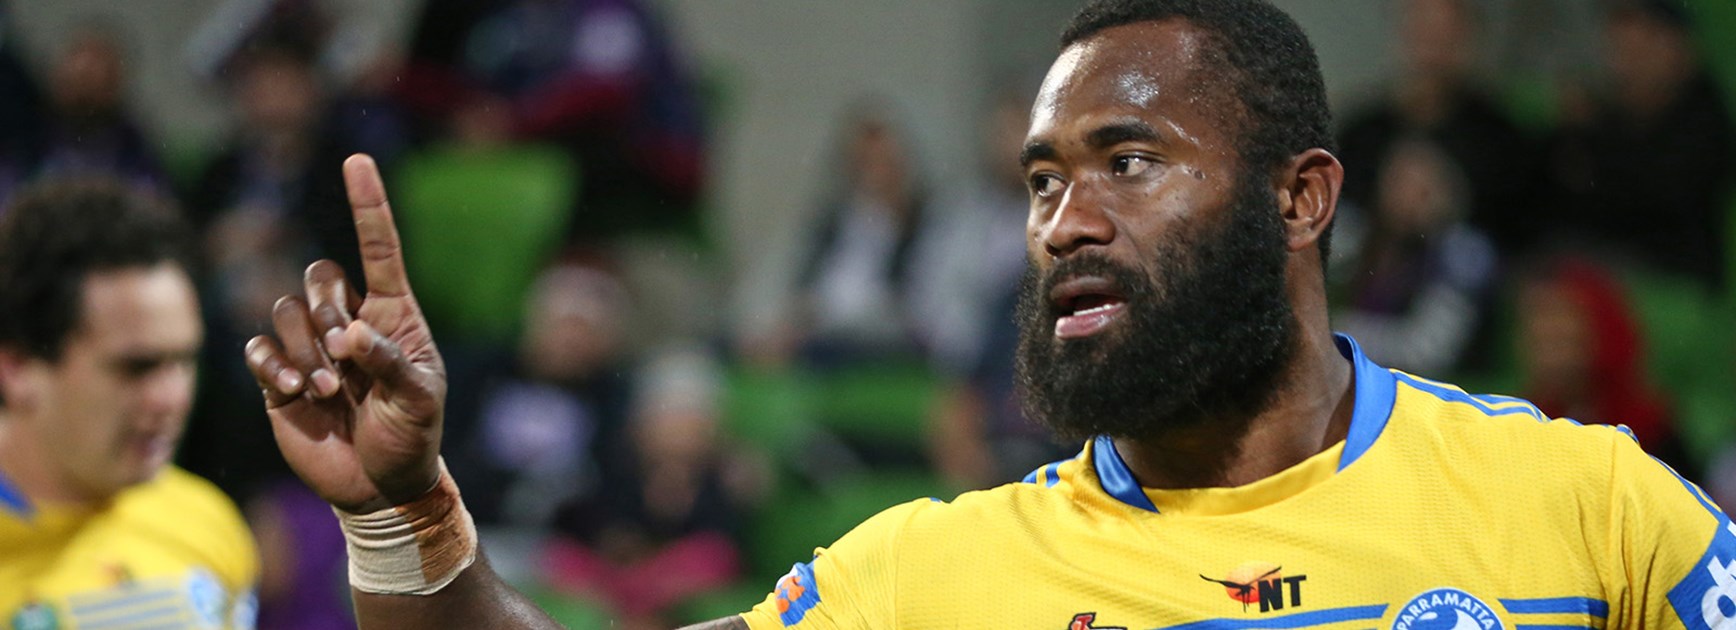 Semi Radradra celebrates a try against the Storm at AAMI Park in Round 14.